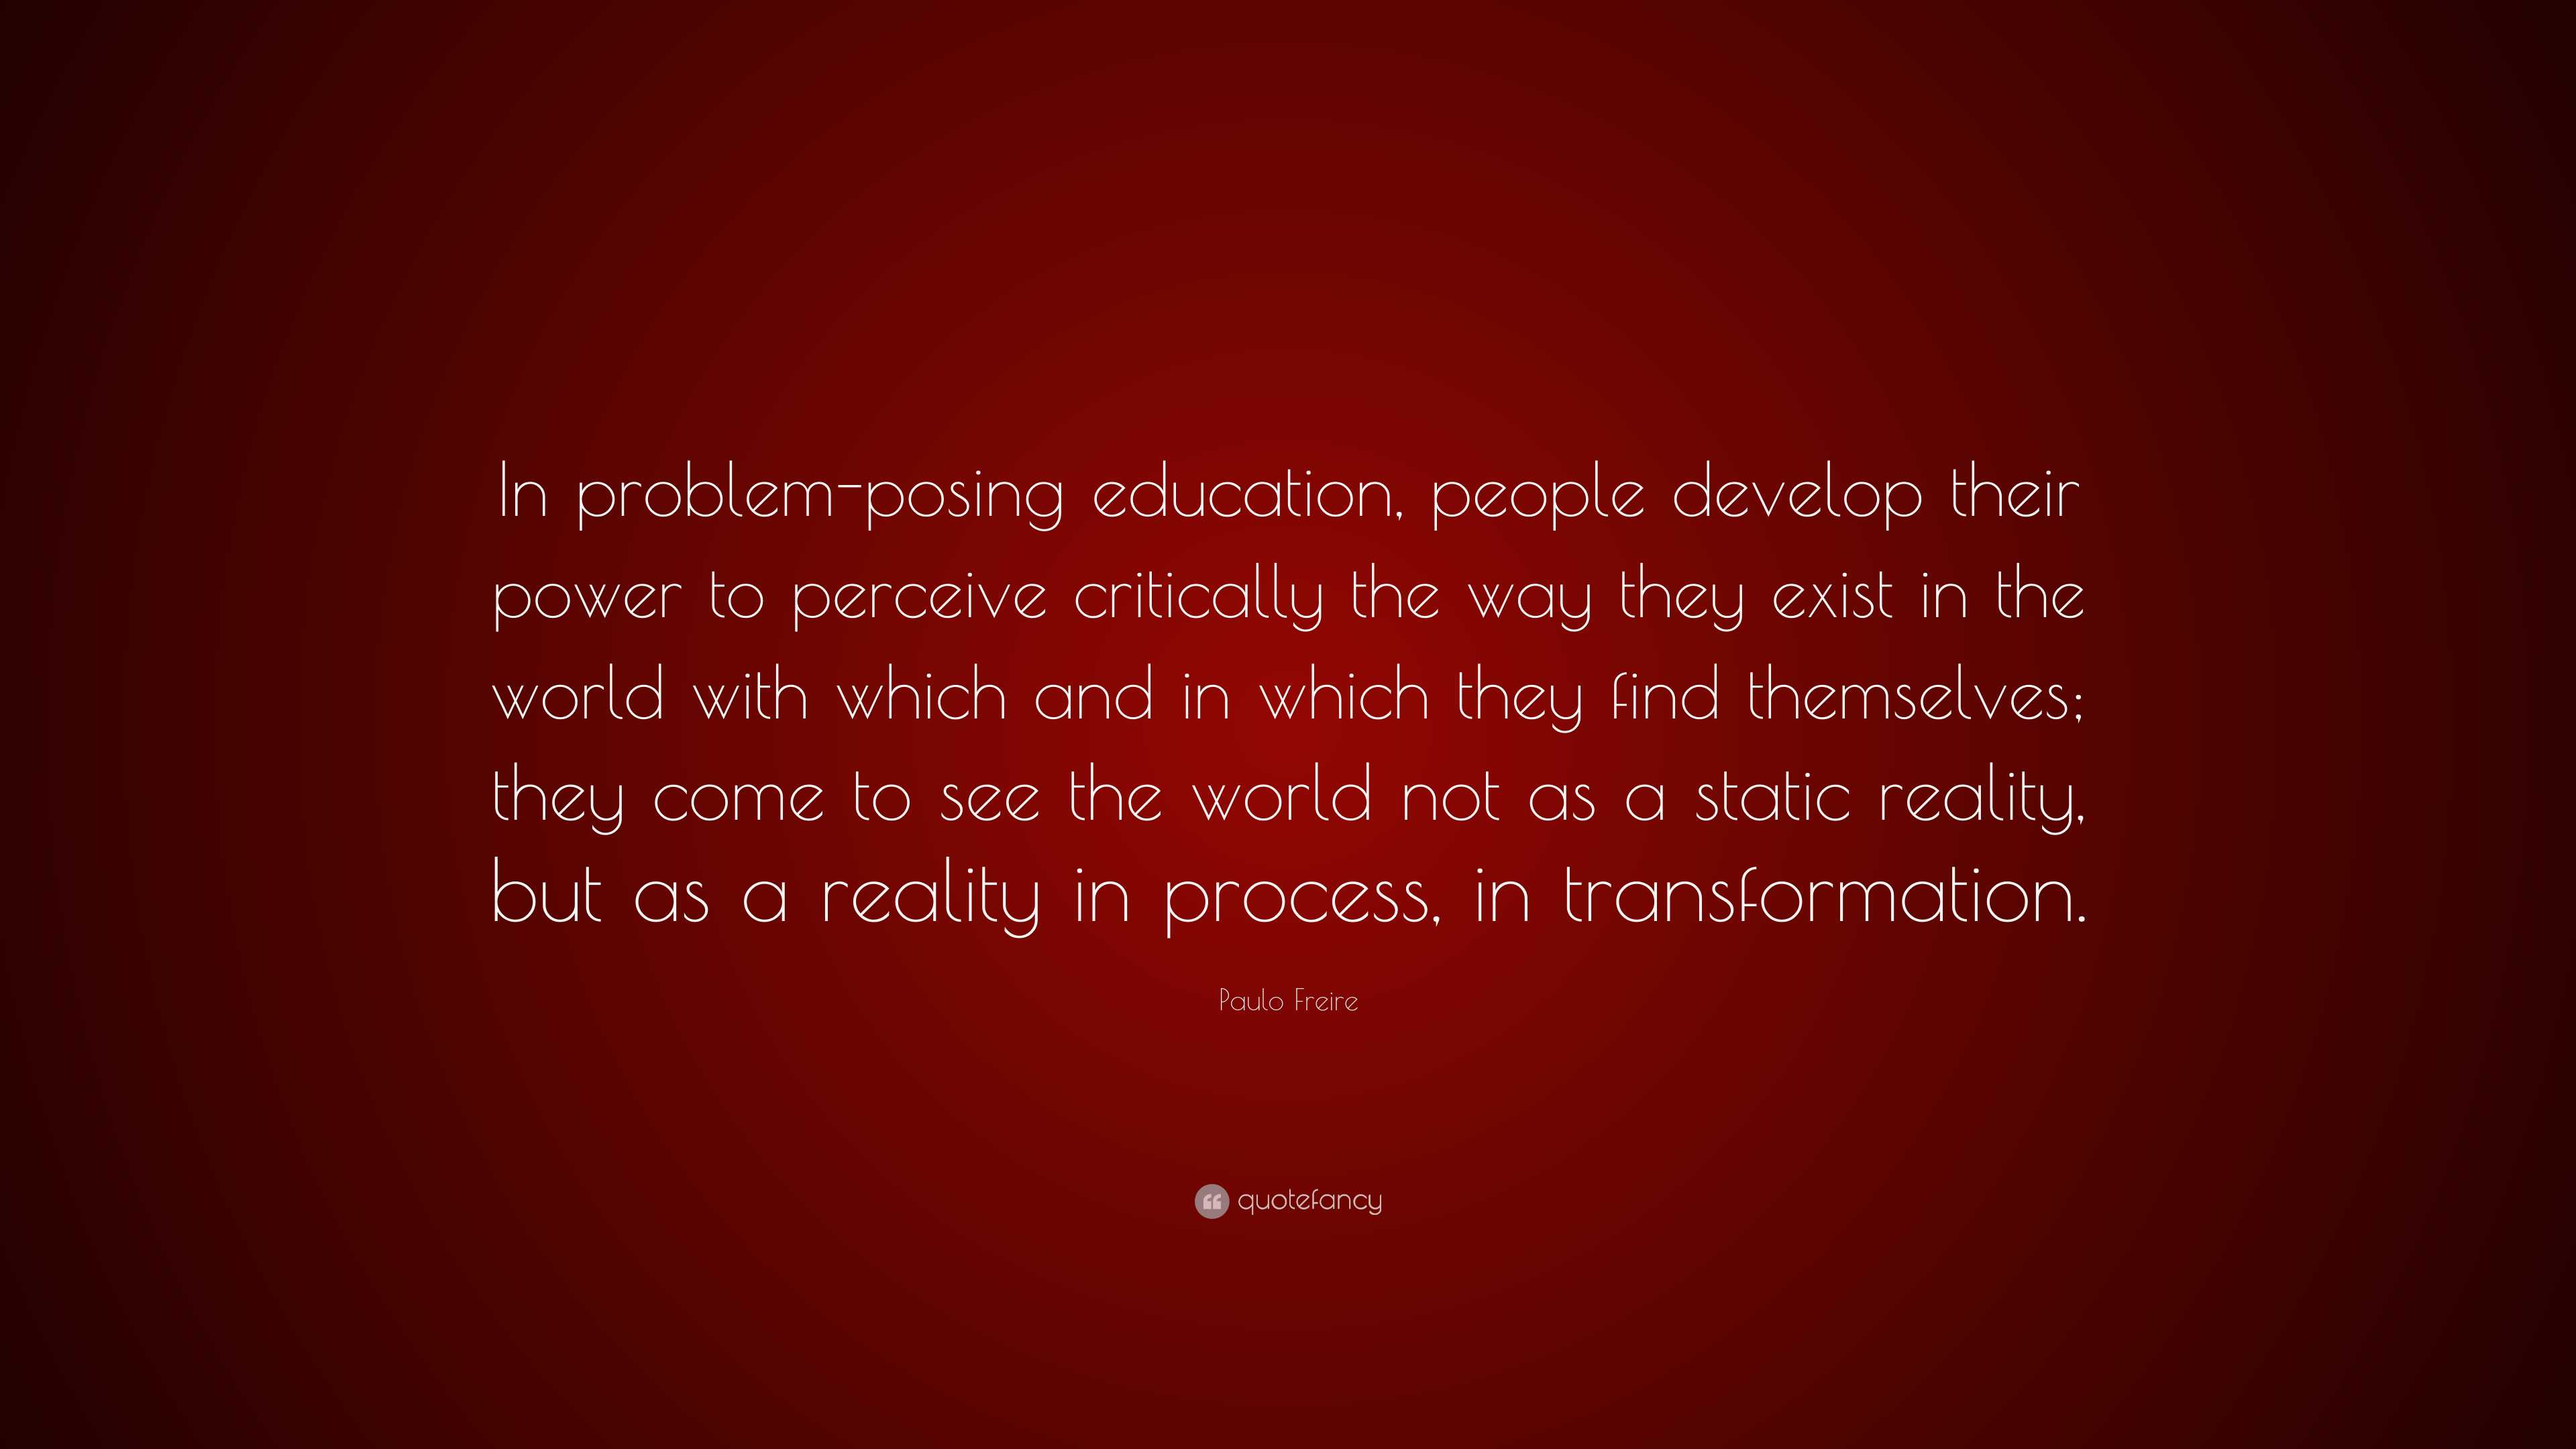 Problem-posing education affirms men and women as beings in the process of  becoming. - IdleHearts